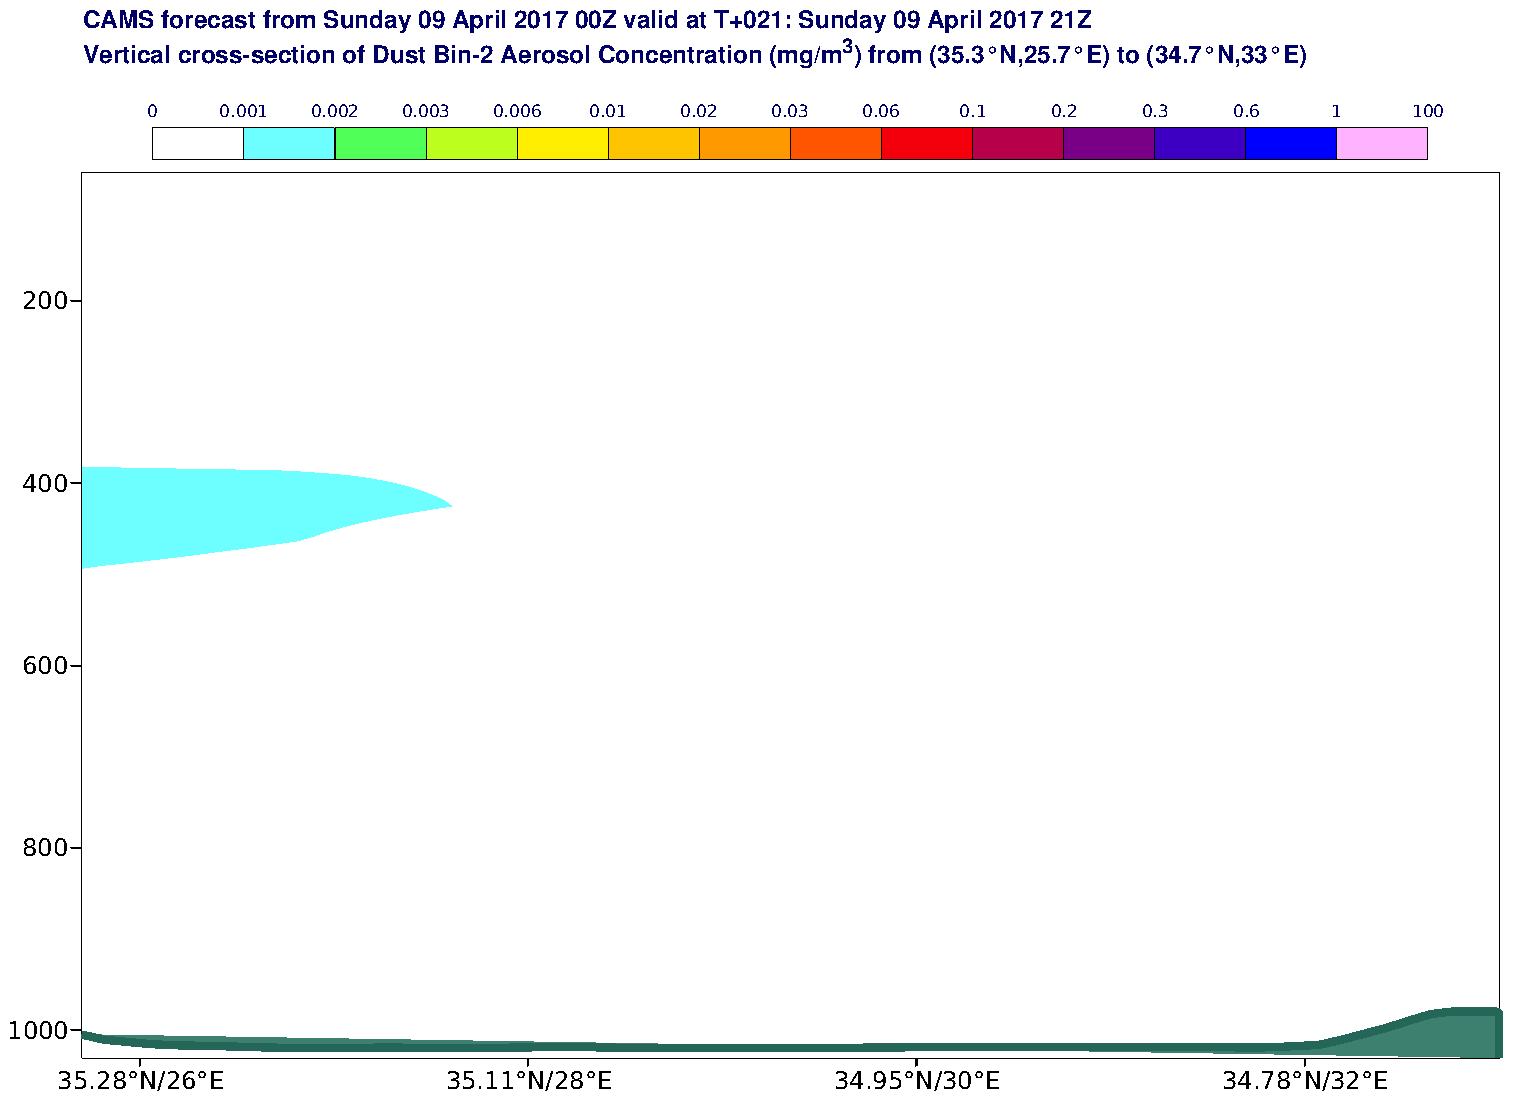 Vertical cross-section of Dust Bin-2 Aerosol Concentration (mg/m3) valid at T21 - 2017-04-09 21:00